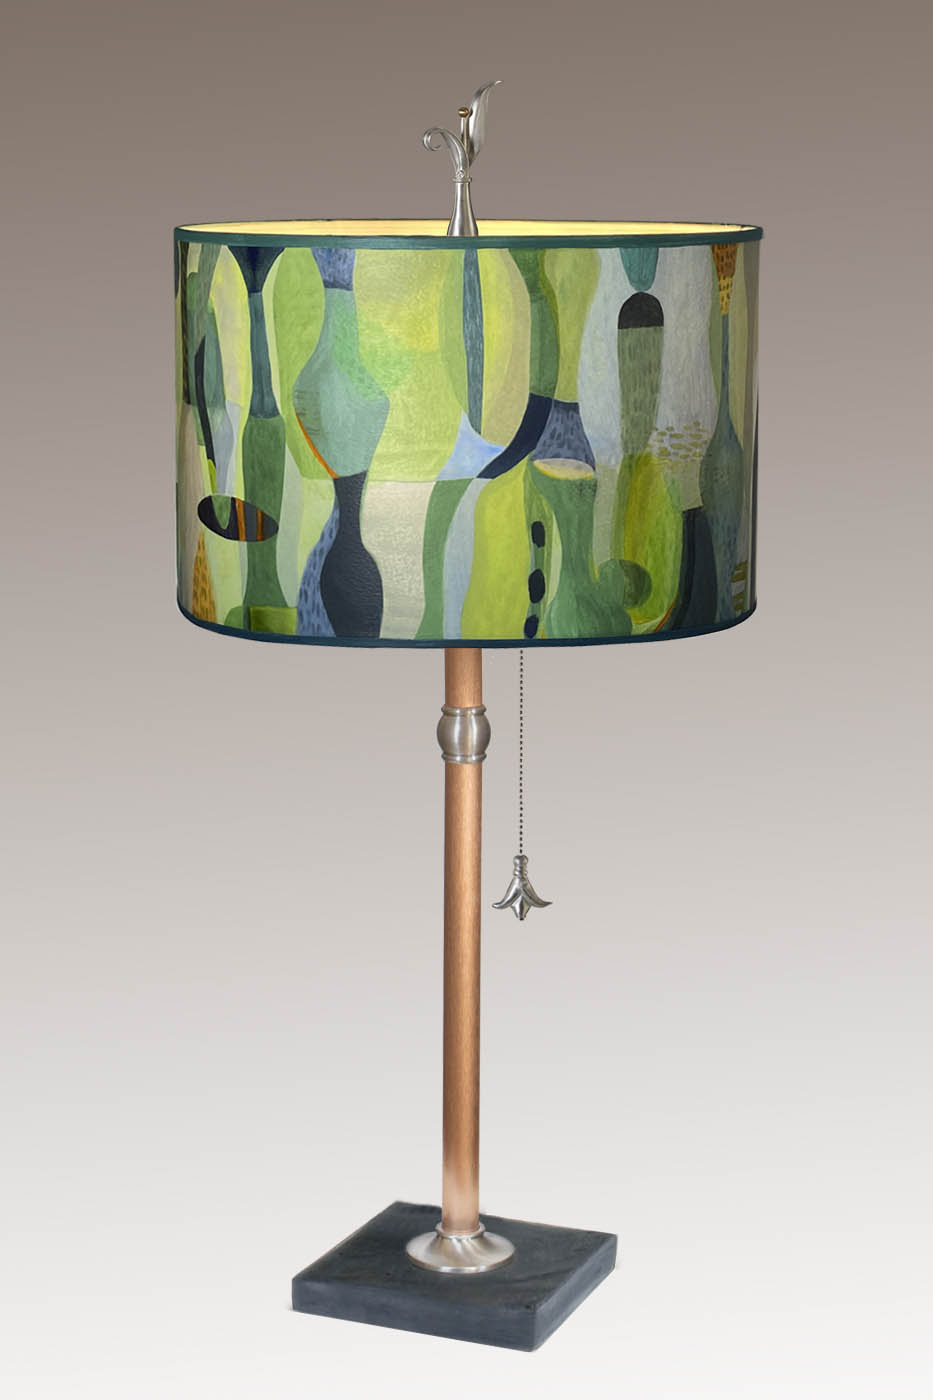 Janna Ugone &amp; Co Table Lamp Copper Table Lamp with Large Drum Shade in Riviera in Citrus